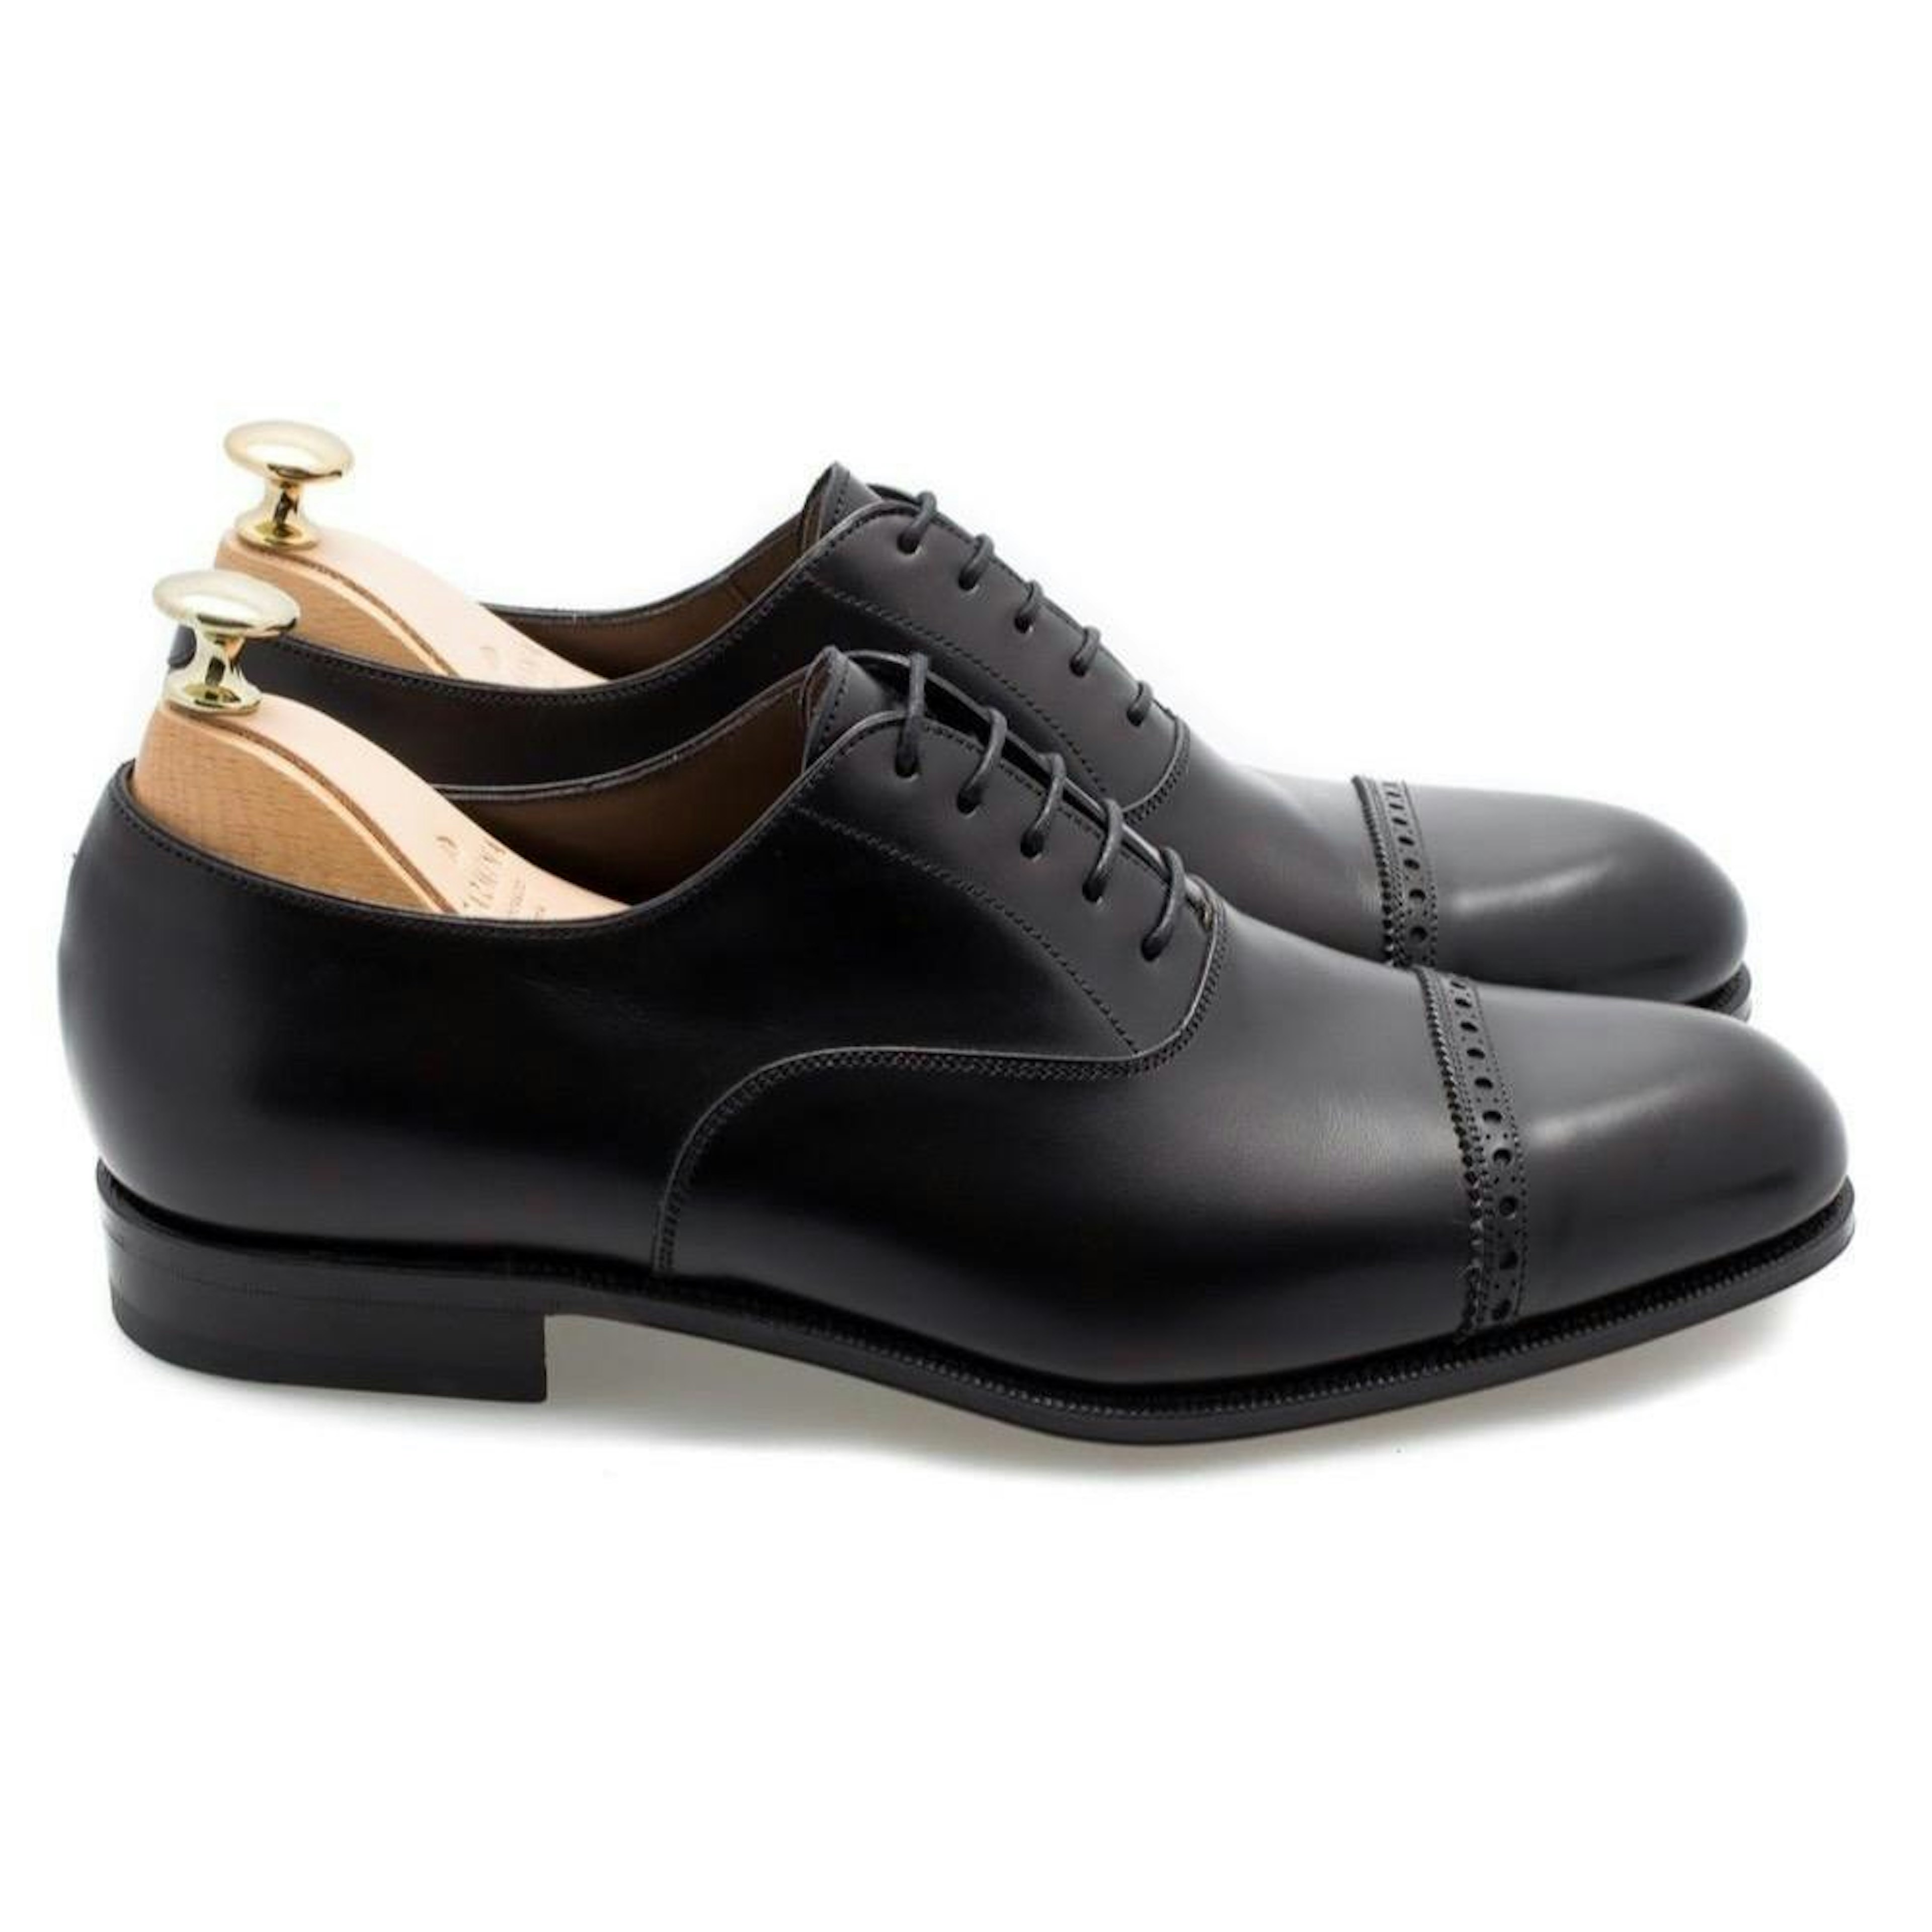 Robert 762 Calf Punched Captoe Oxford - The Armoury